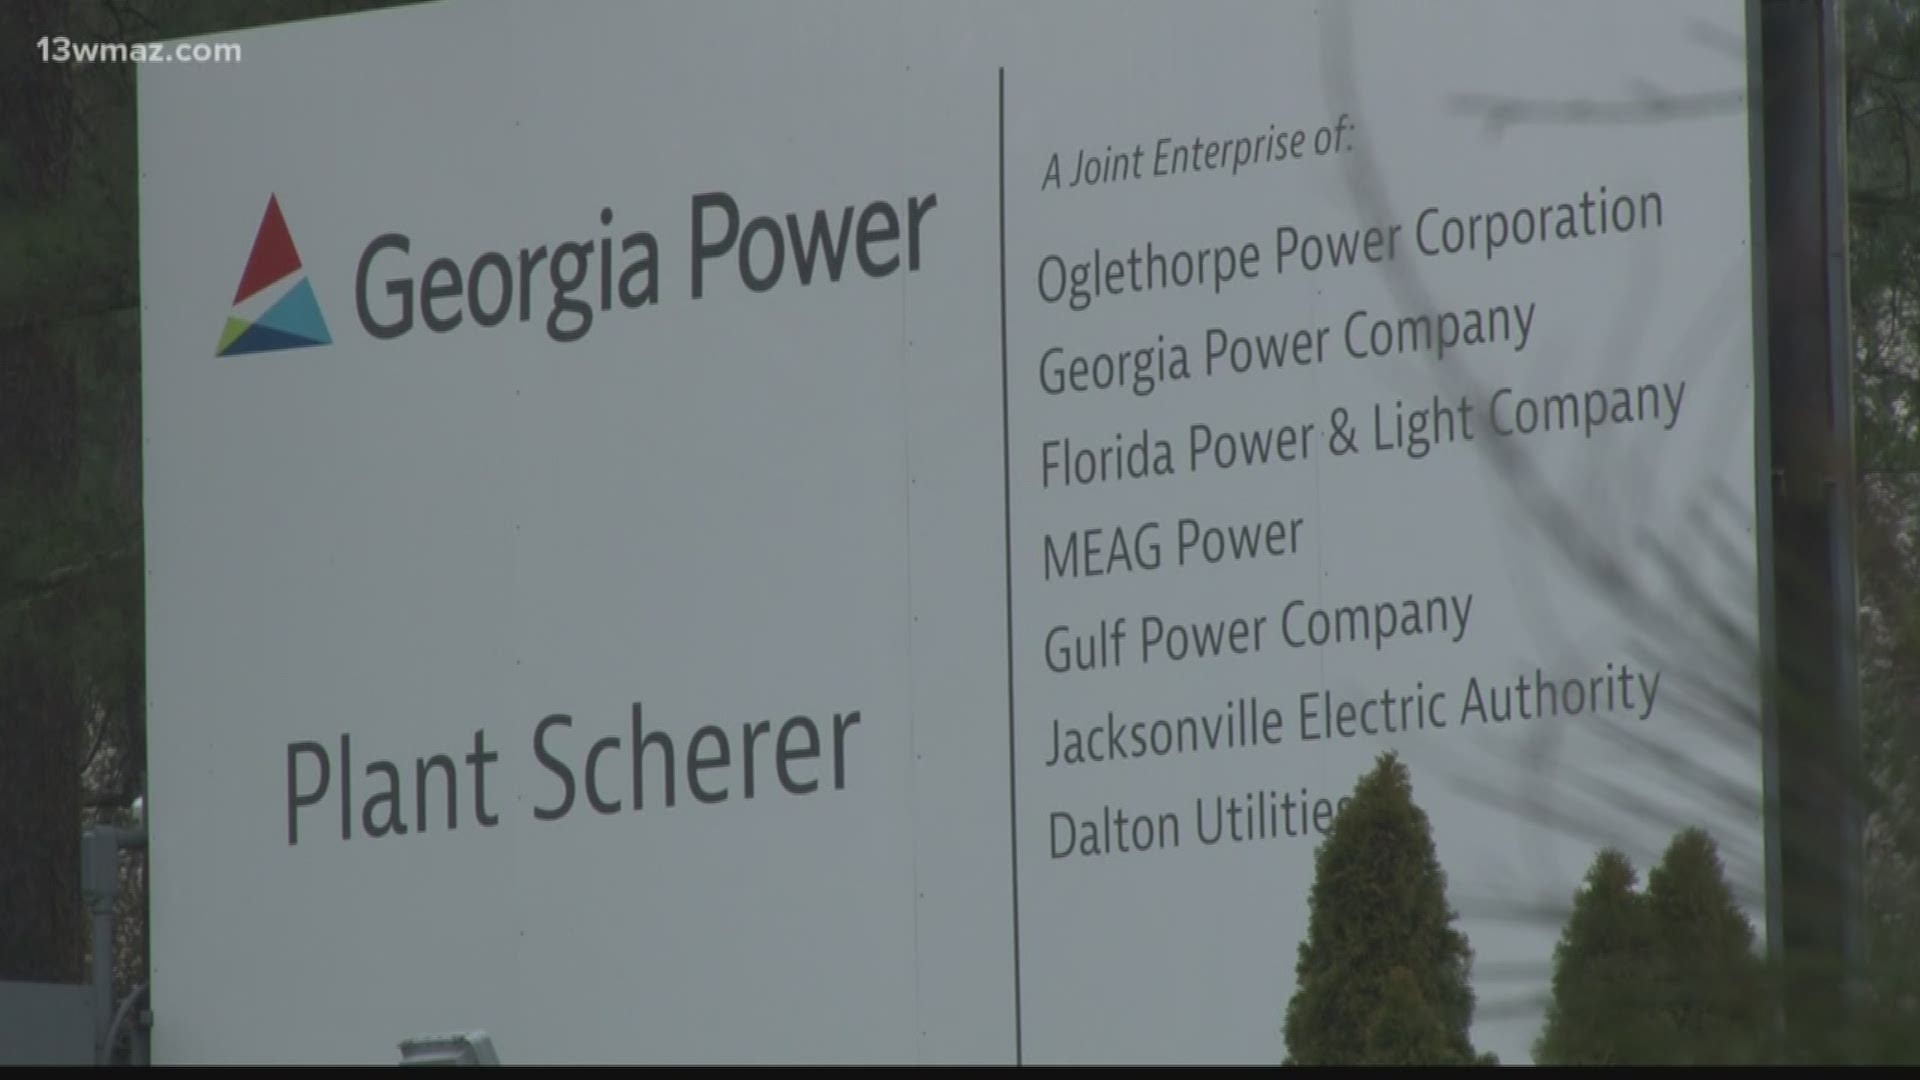 As concerns of water contamination continue around Juliette, Georgia Power sent letters to homeowners address questions about the safety of their drinking water.